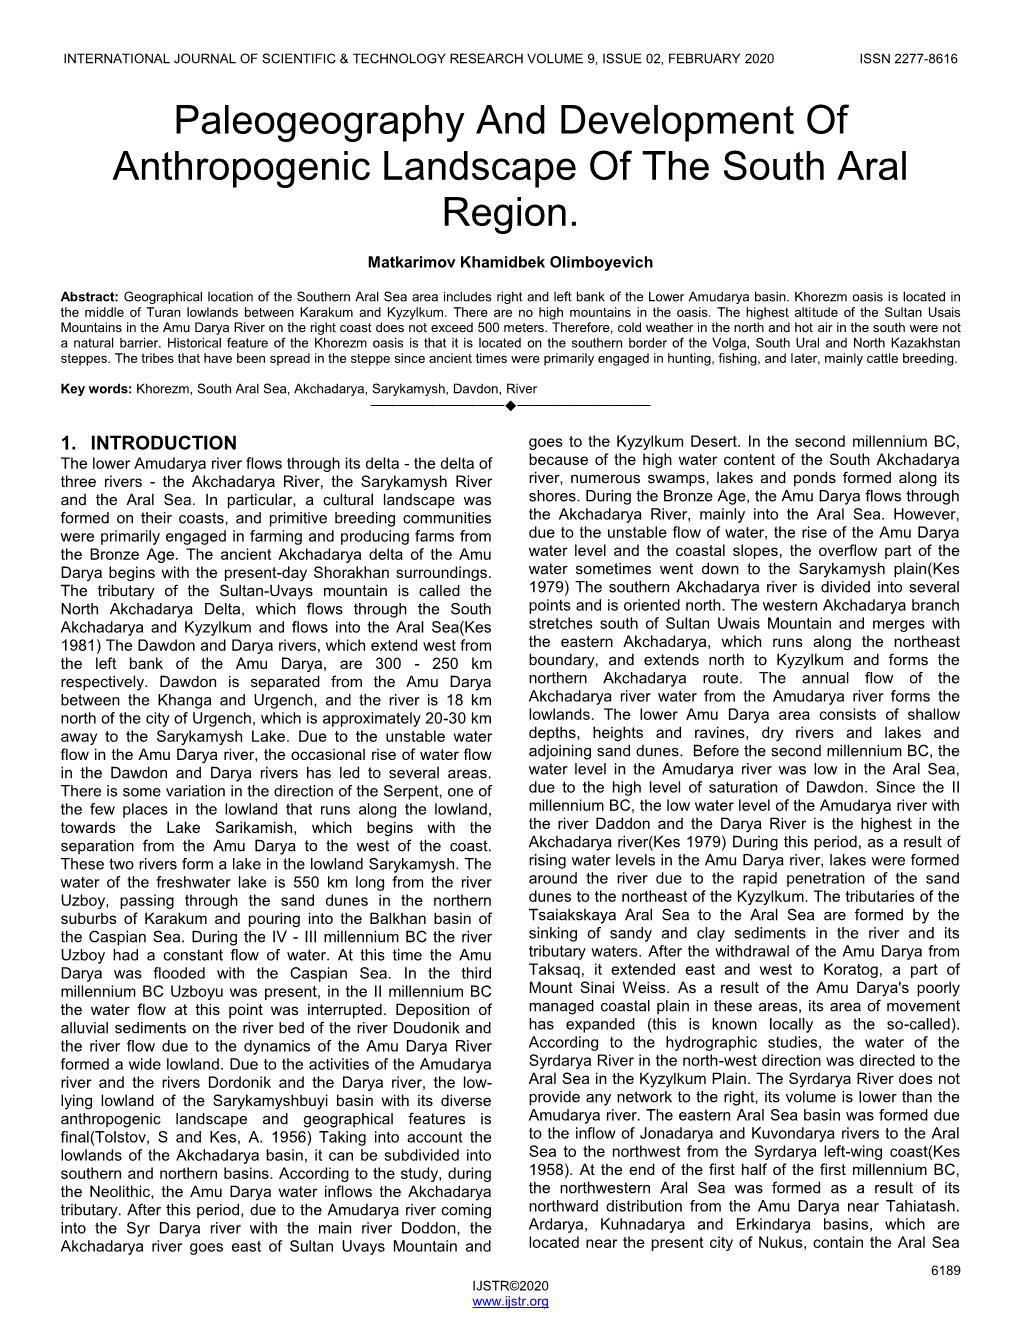 Paleogeography and Development of Anthropogenic Landscape of the South Aral Region